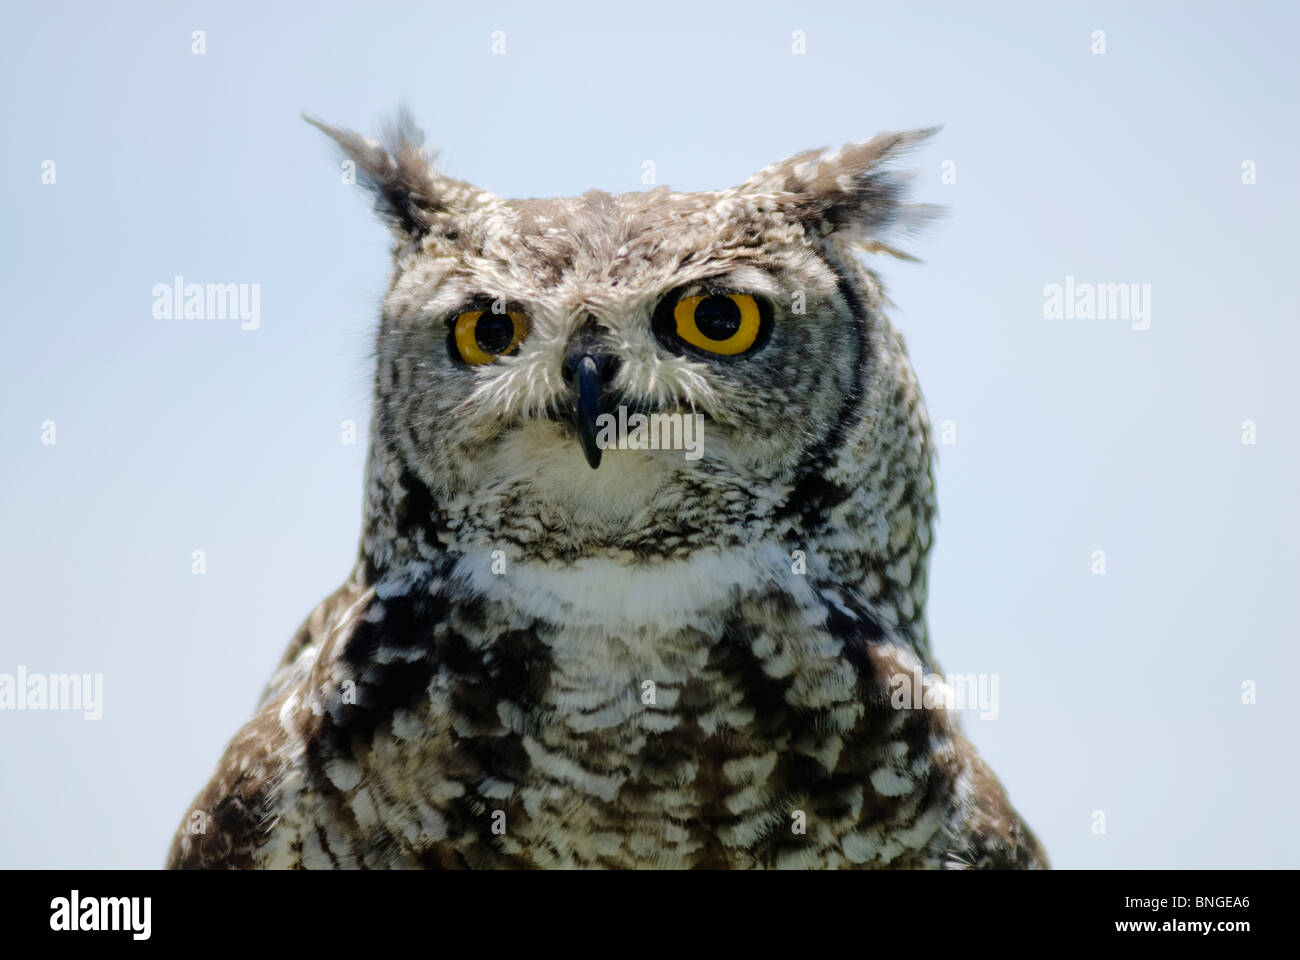 Portrait image of a Spotted eagle owl. Stock Photo